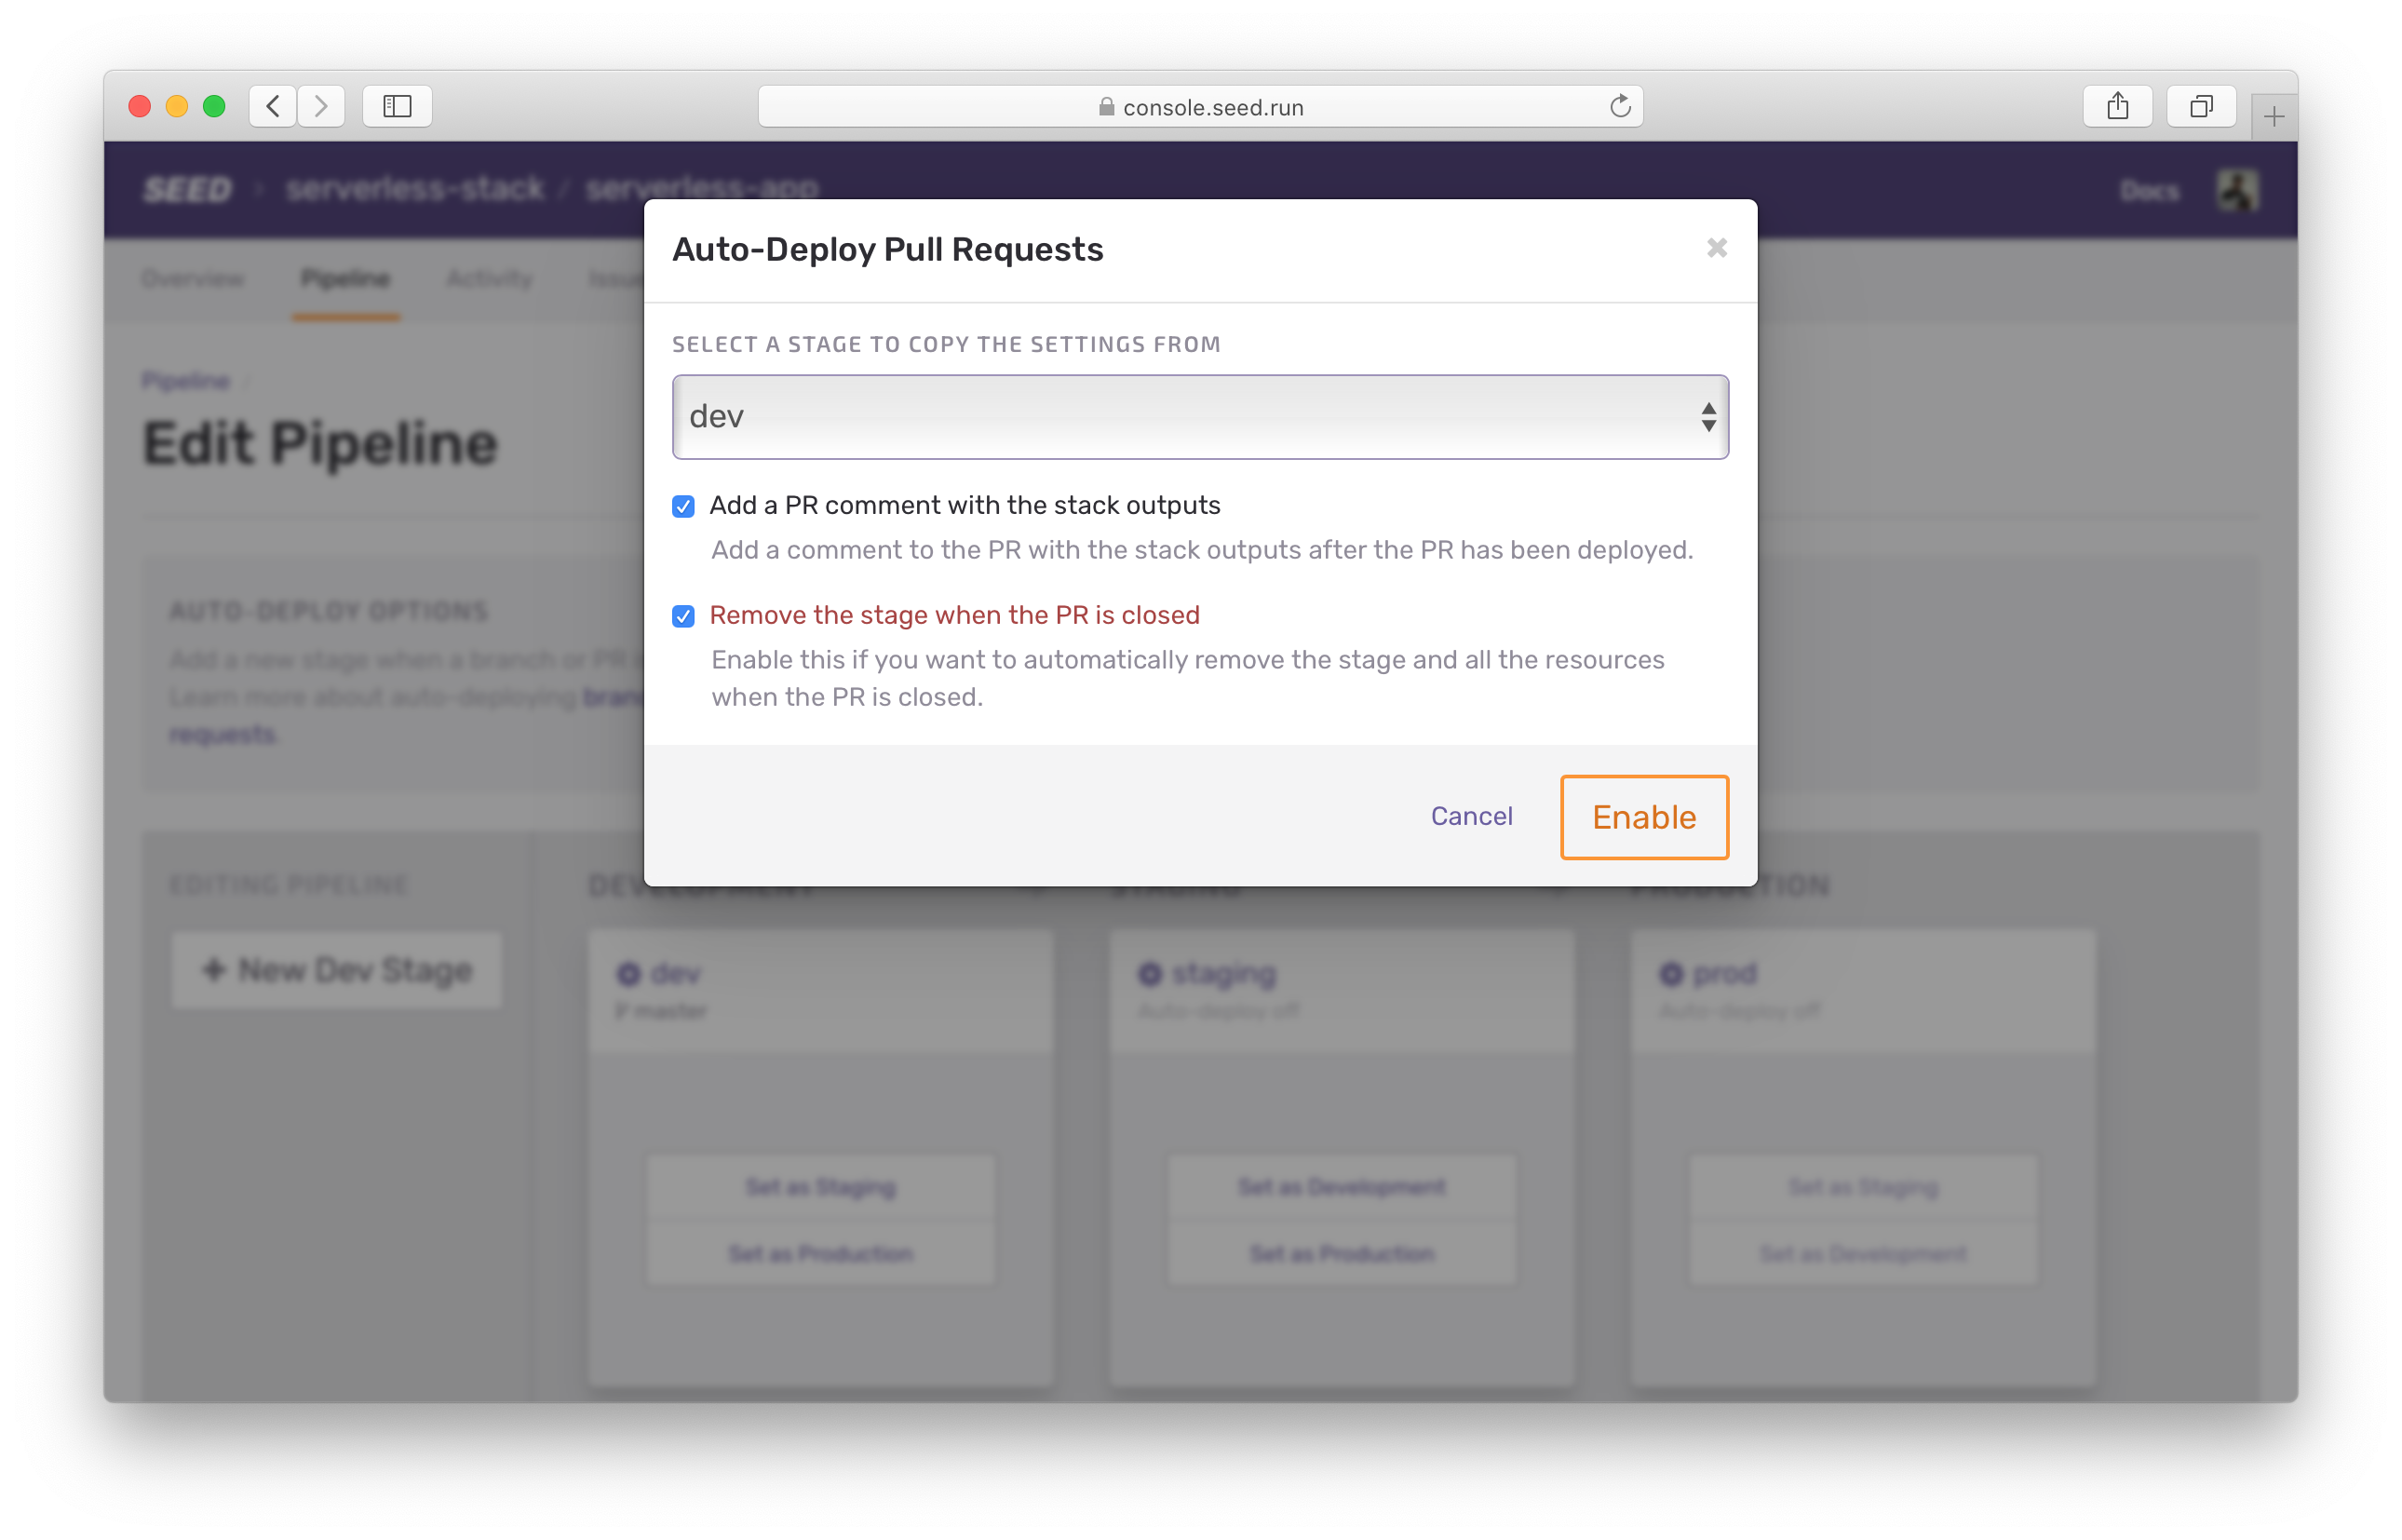 Auto-deploy pull request options